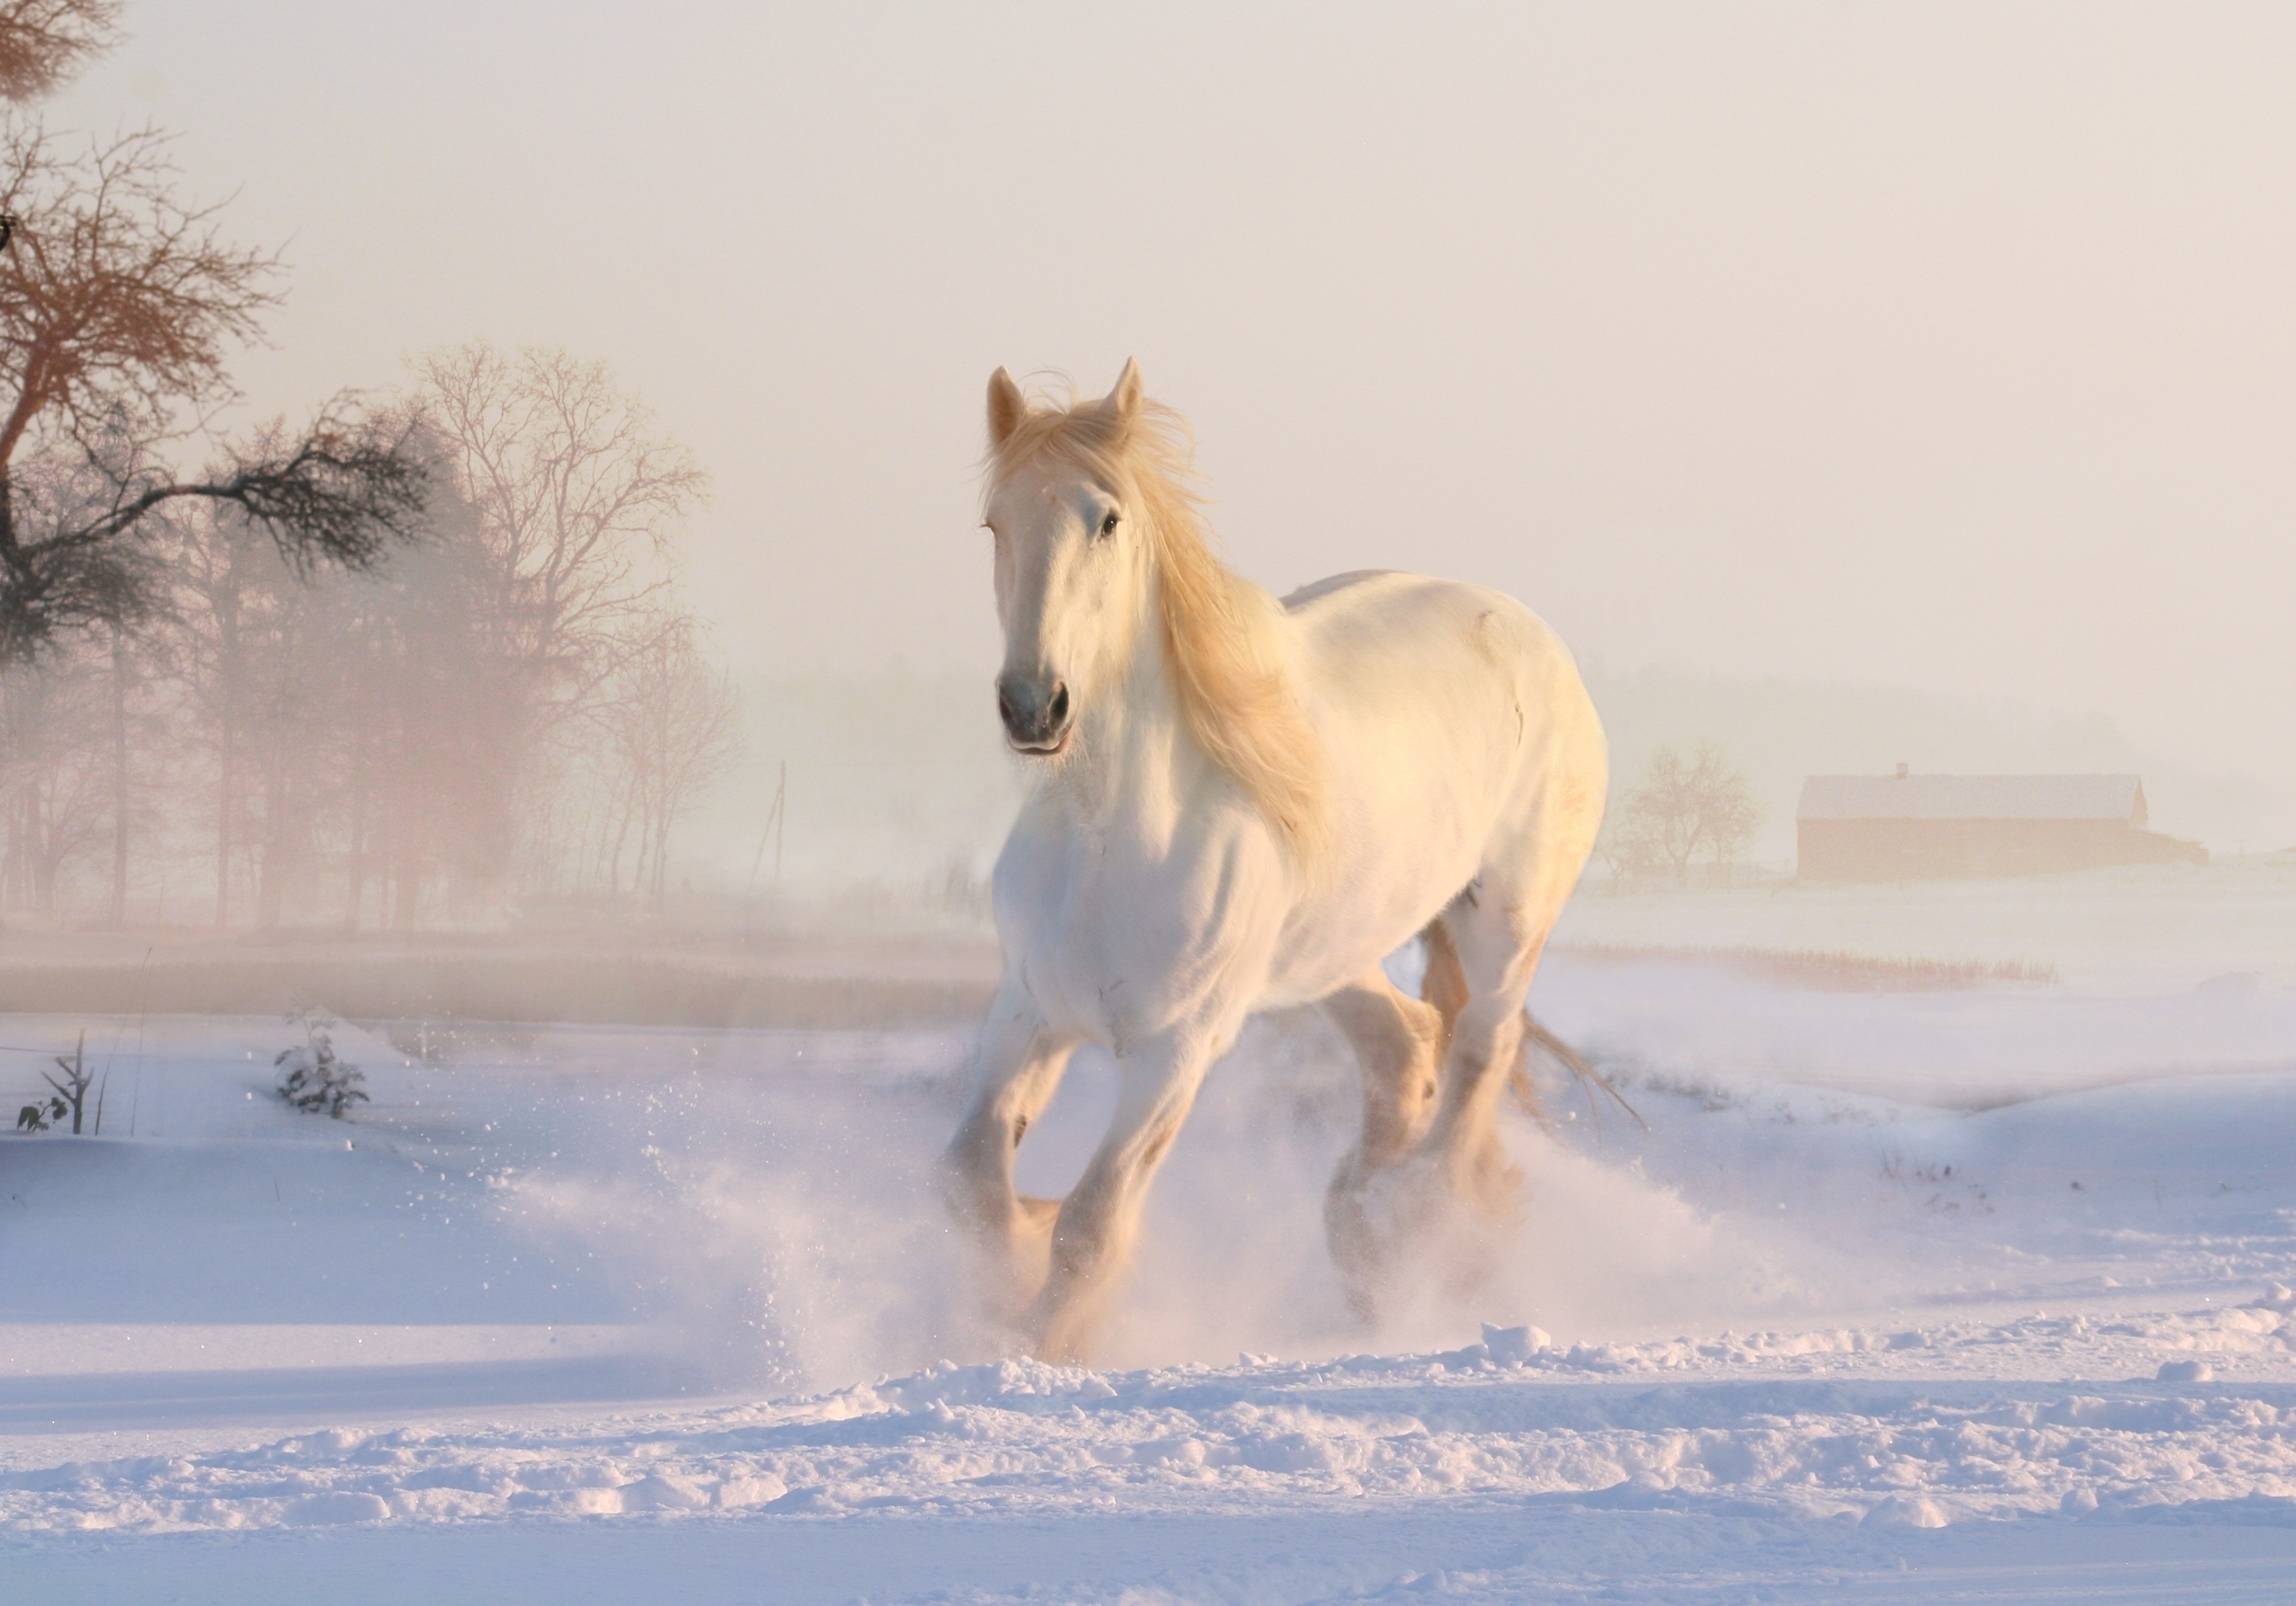 Galloping White Horse in the snow by Dorota Kudyba